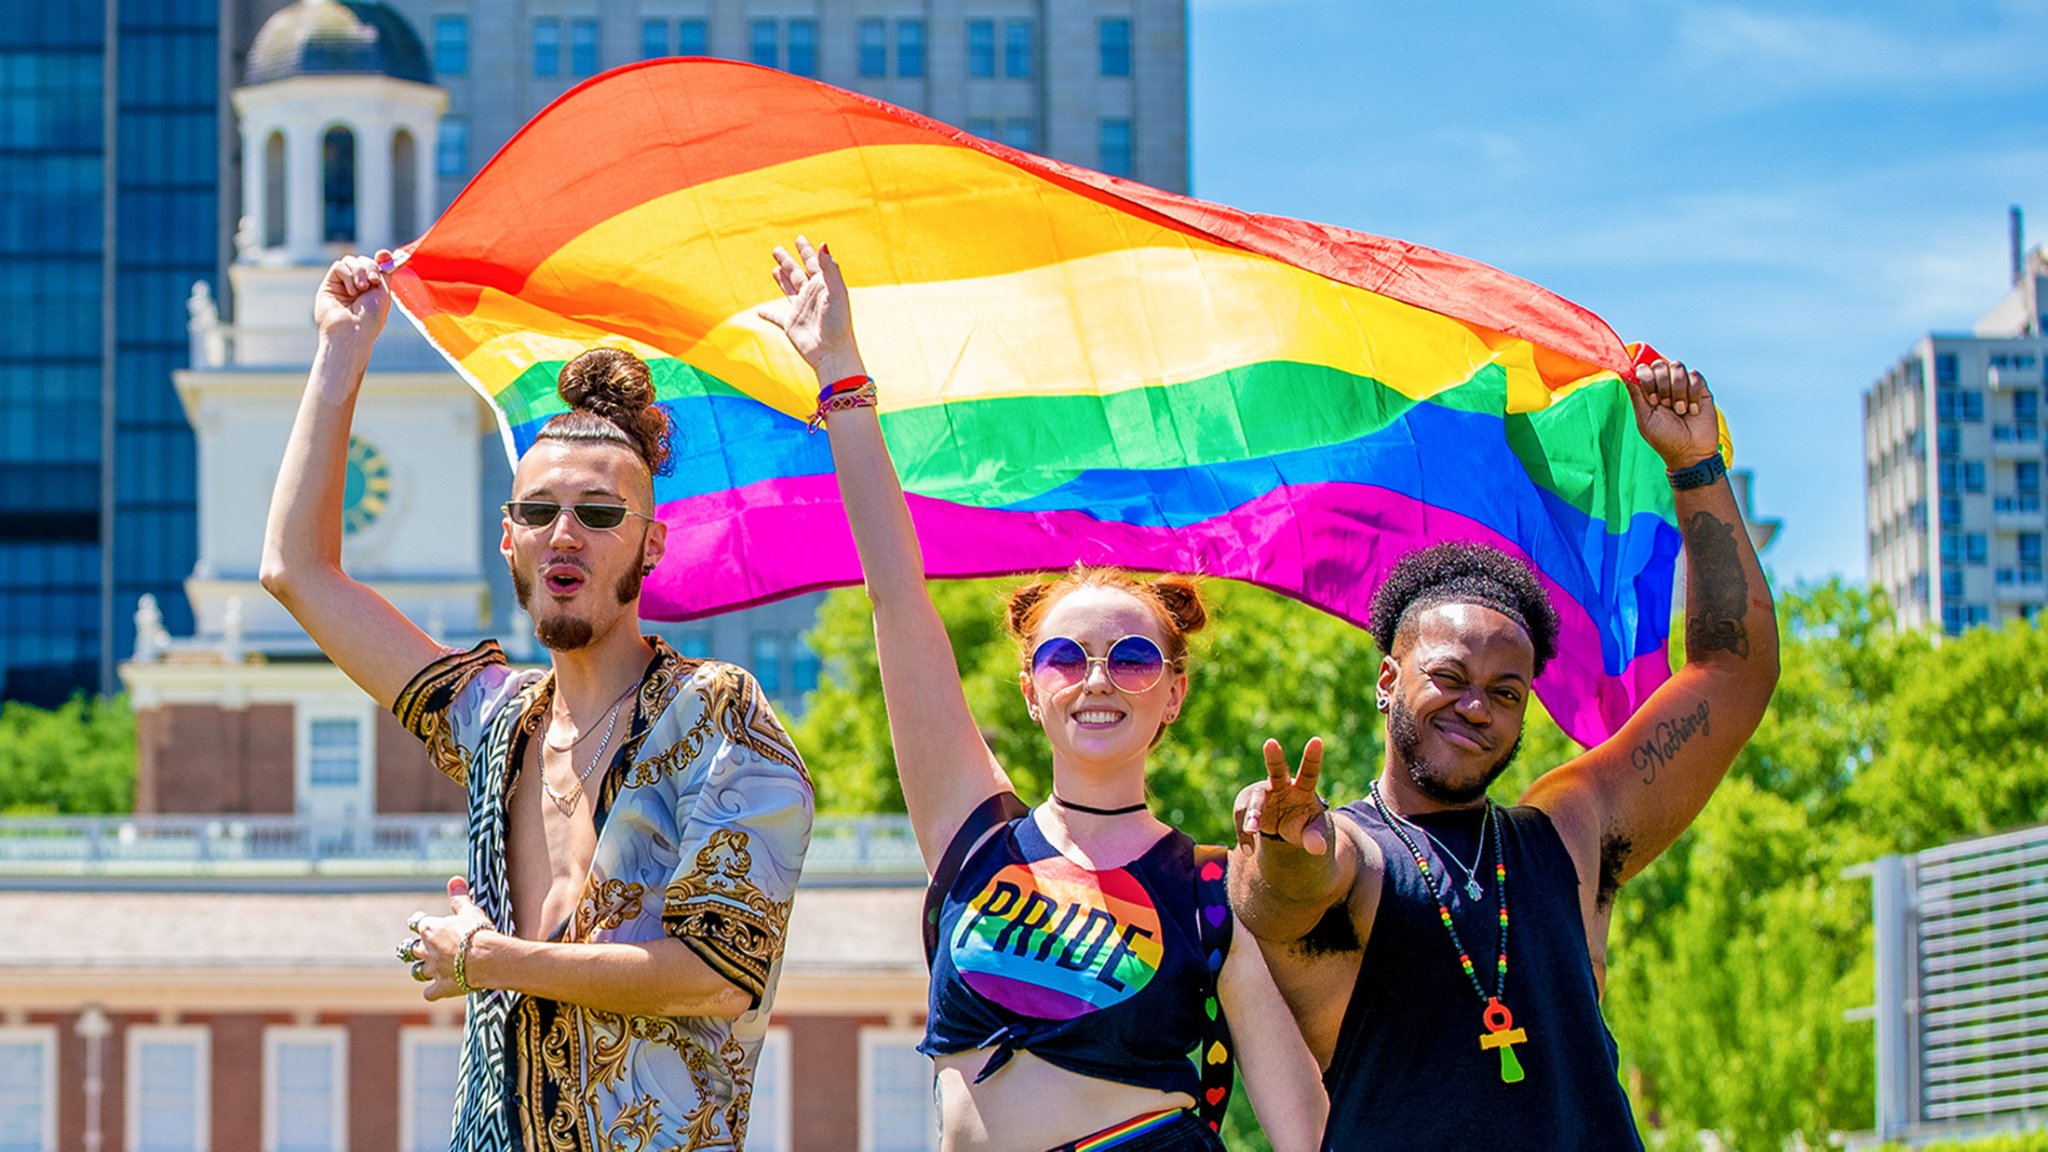 A Guide to Philly's Massive Pride March & Festival This Sunday